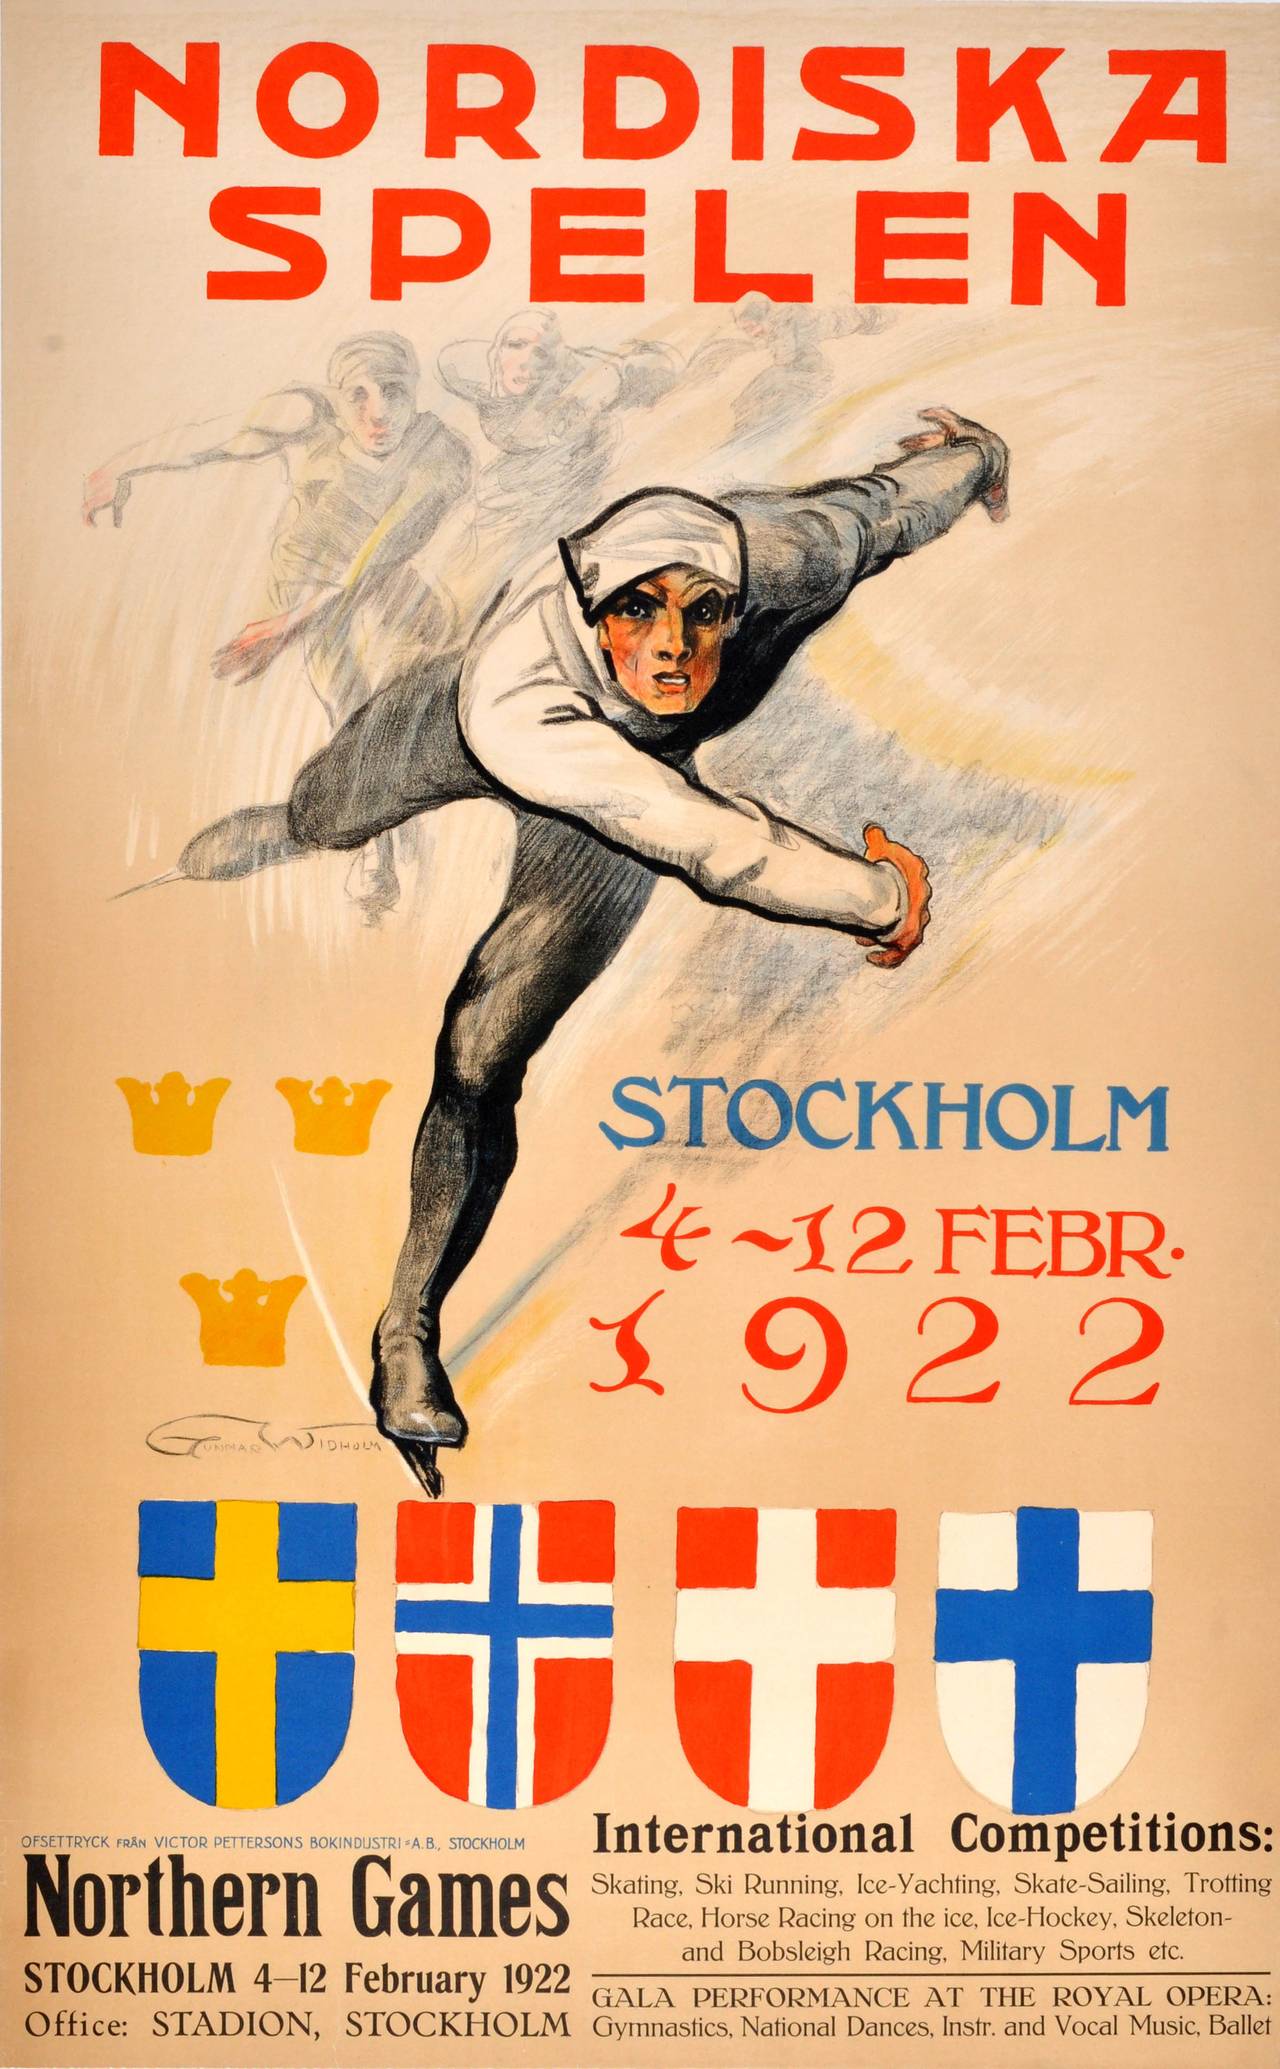 Gunwar Windholm Print - Original Winter Sports Poster For The 1922 Northern Games Featuring Ice Skating